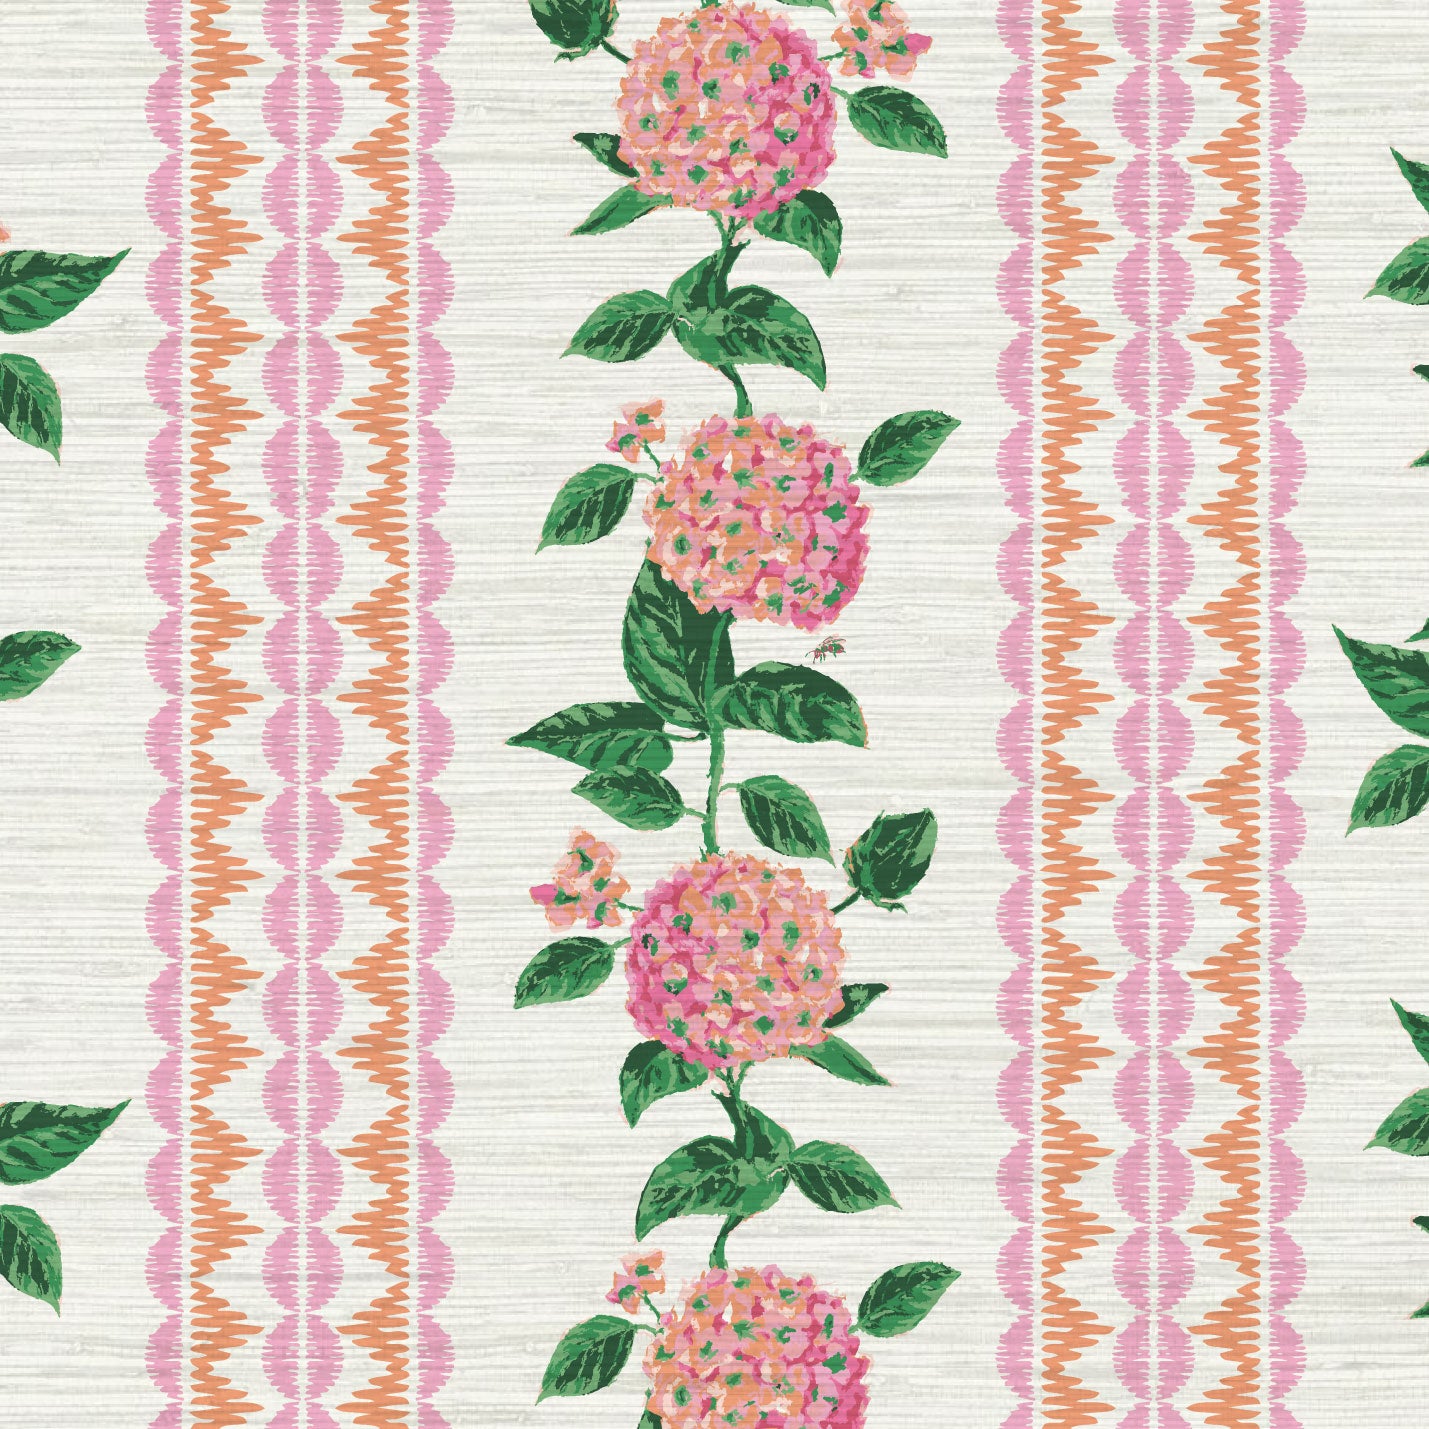 Grasscloth wallpaper Natural Textured Eco-Friendly Non-toxic High-quality Sustainable Interior Design Bold Custom Tailor-made Retro chic Grand millennial Maximalism Traditional Dopamine decor preppy garden botanical hydrangea floral stripe leaf lace pink orange purple girl nursery kid feminine grandma chic cottage core traditional american countryside